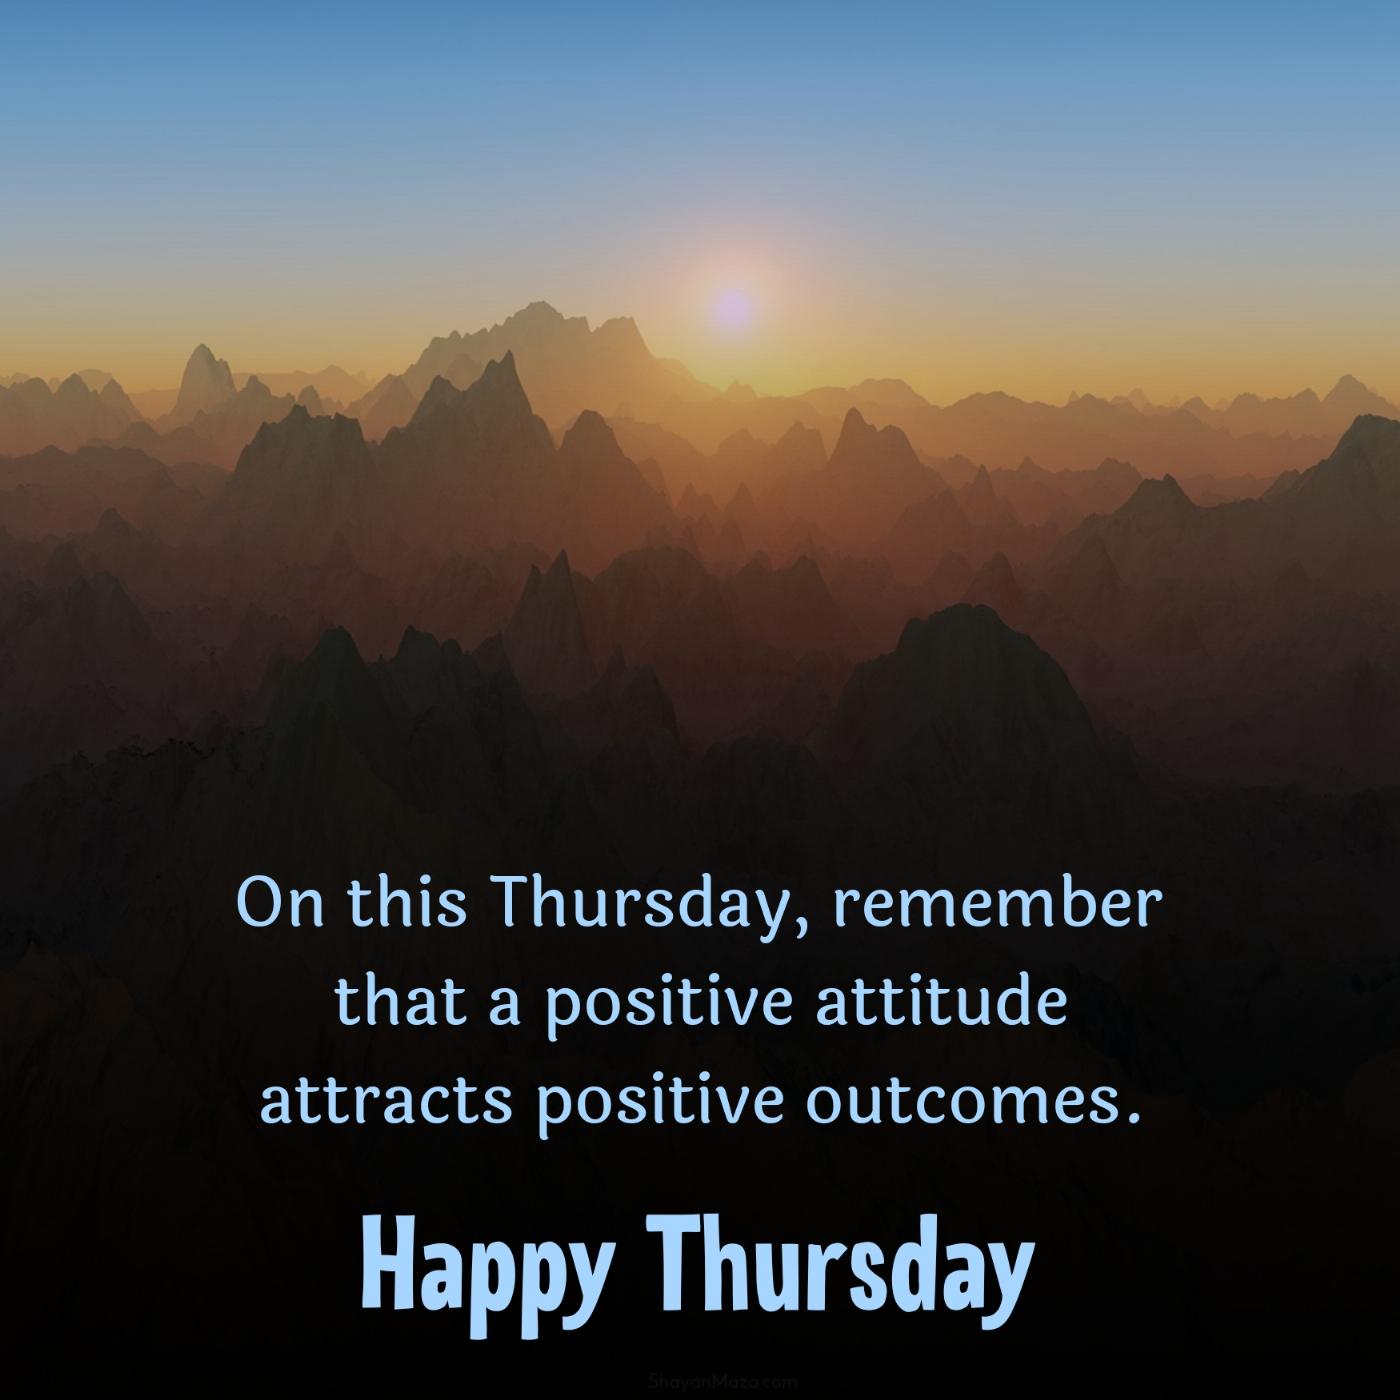 On this Thursday remember that a positive attitude attracts